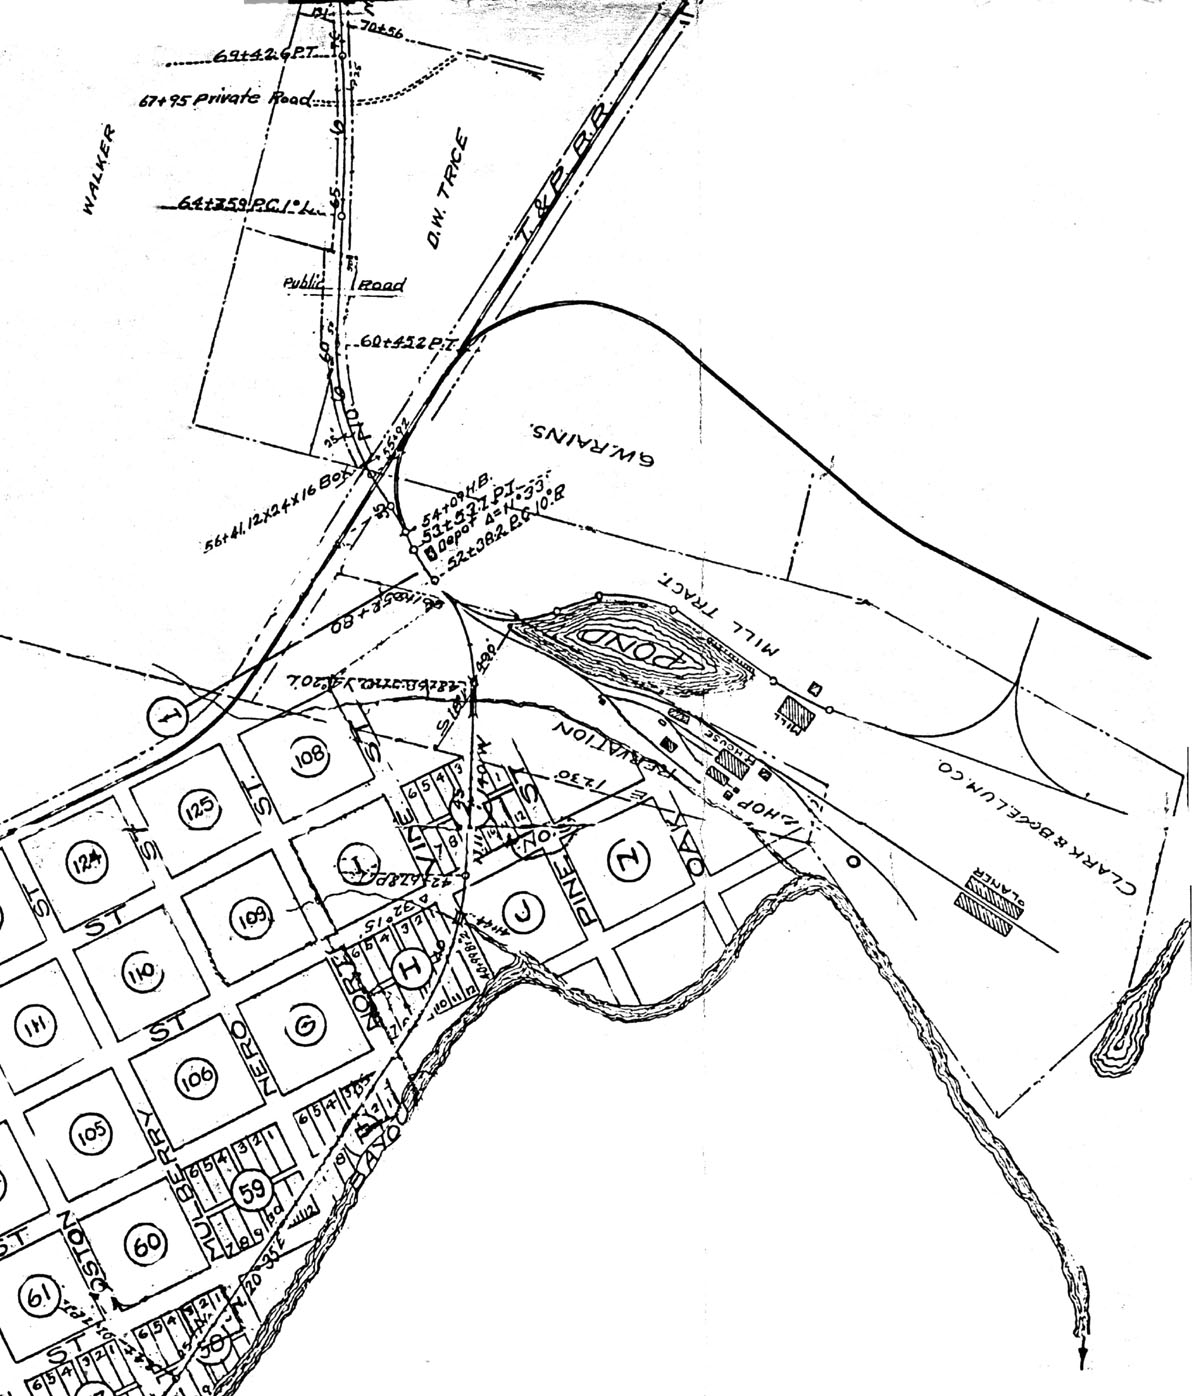 Clark & Boice Lumber Company (Tex.), map showing mill layout east of Jefferson in 1918.